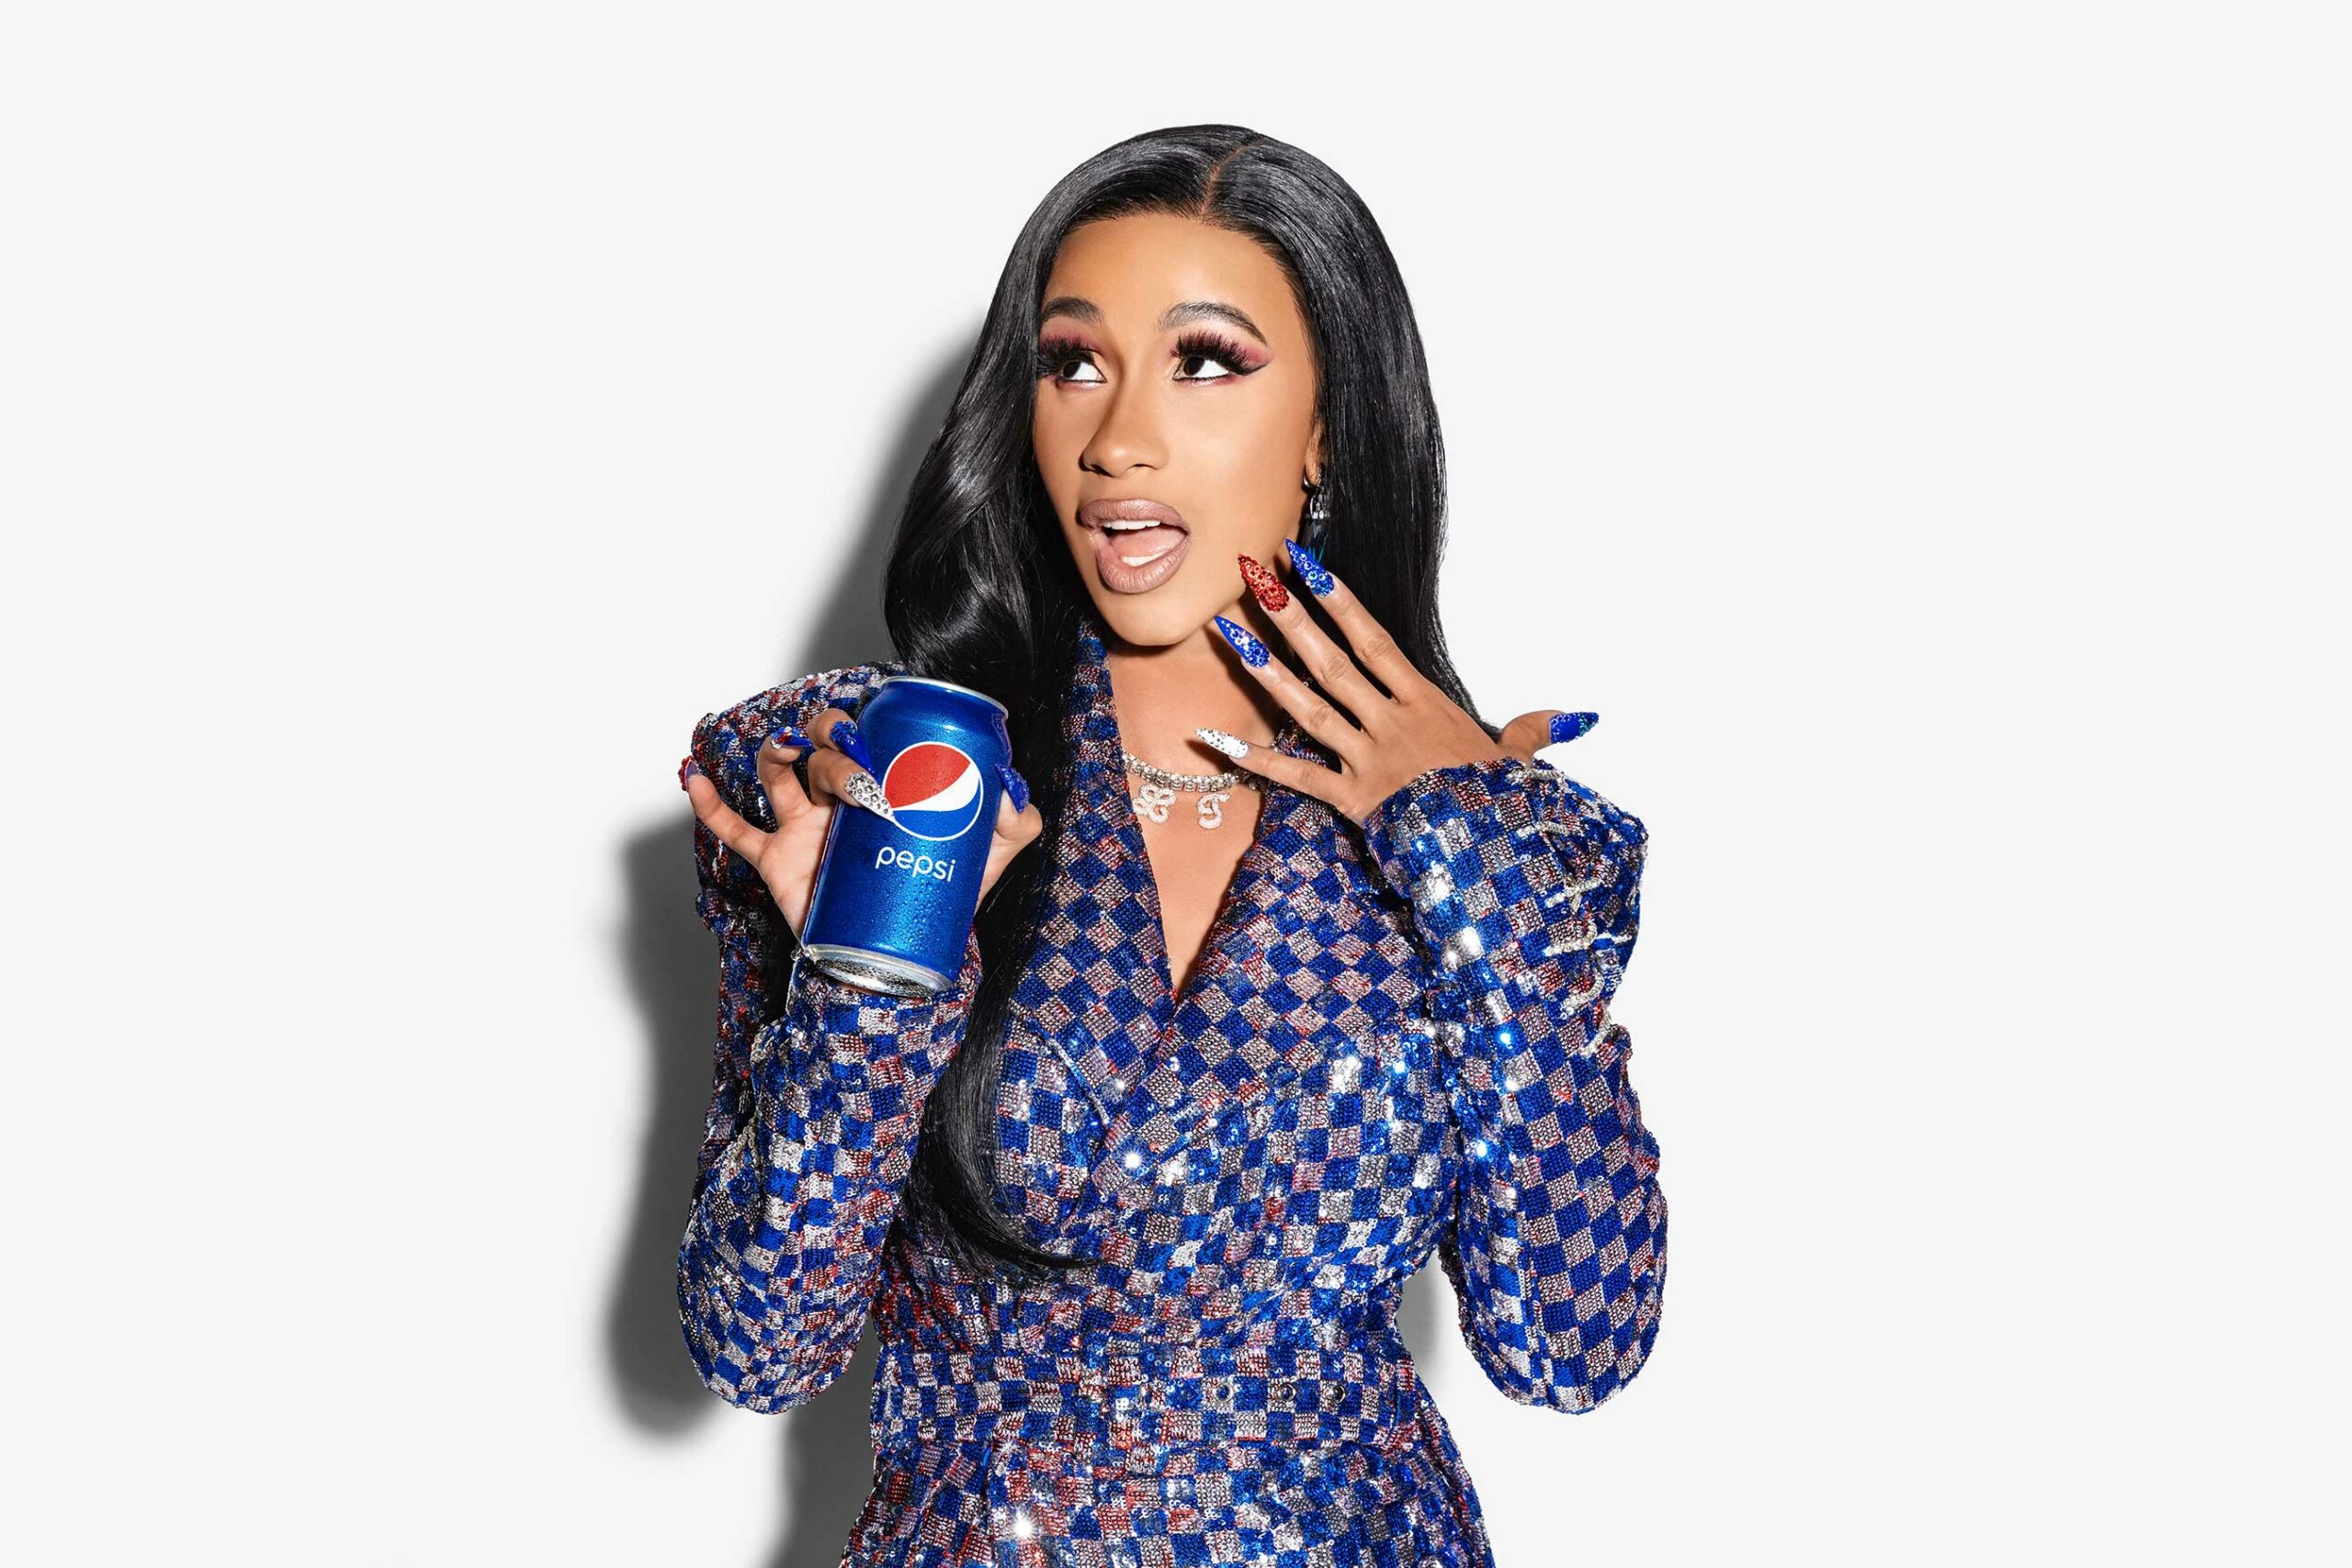 Who is the female in the new Pepsi commercial?